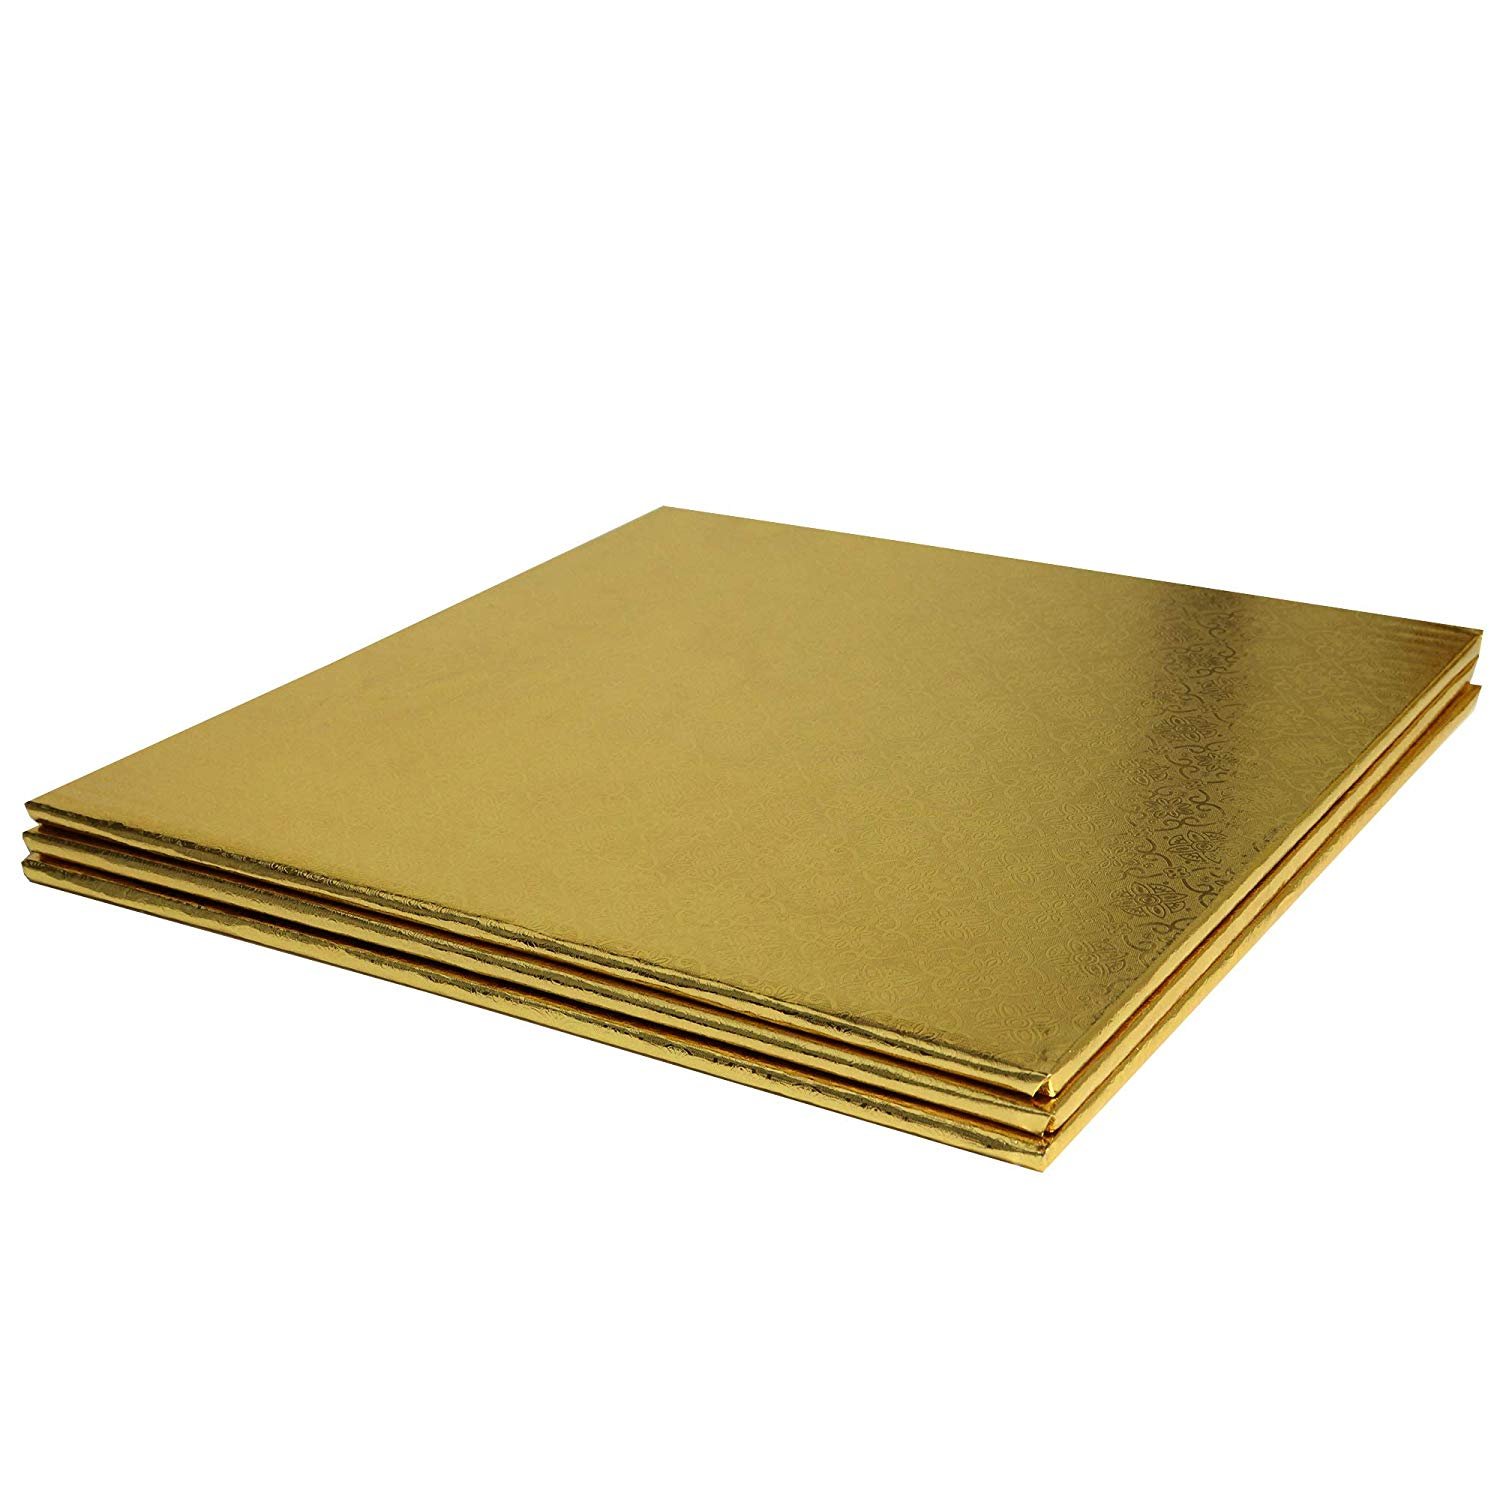 O'Creme Gold Wraparound Square Cake Pastry Drum Board 1/4 Inch Thick, 12 Inch x 12 Inch - Pack of 10 - image 4 of 6